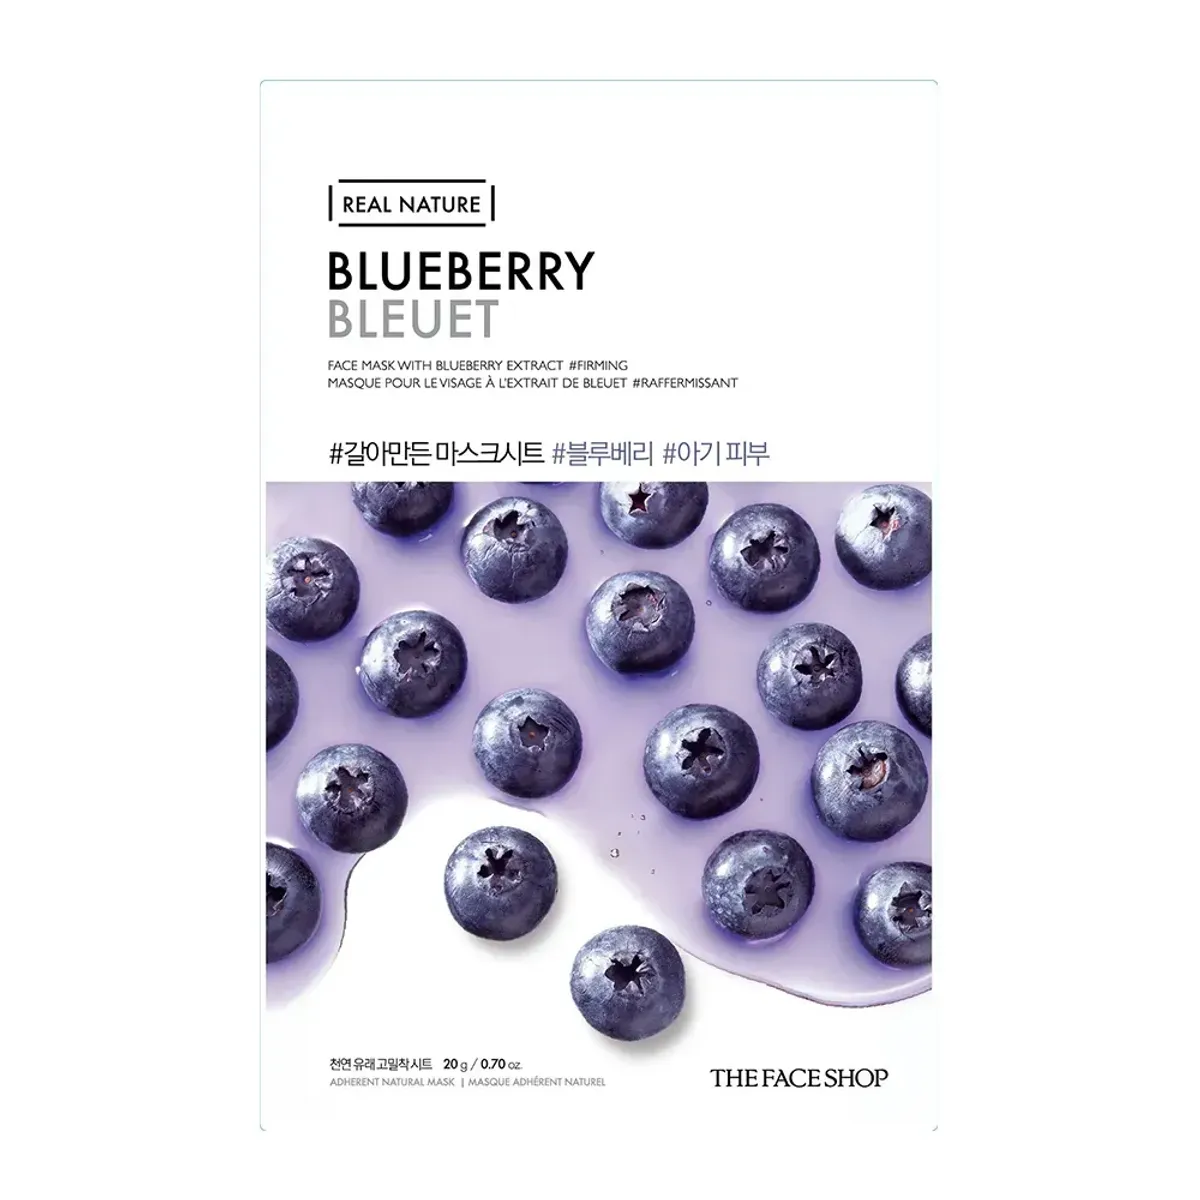 thefaceshop-real-nature-blueberry-face-mask-12